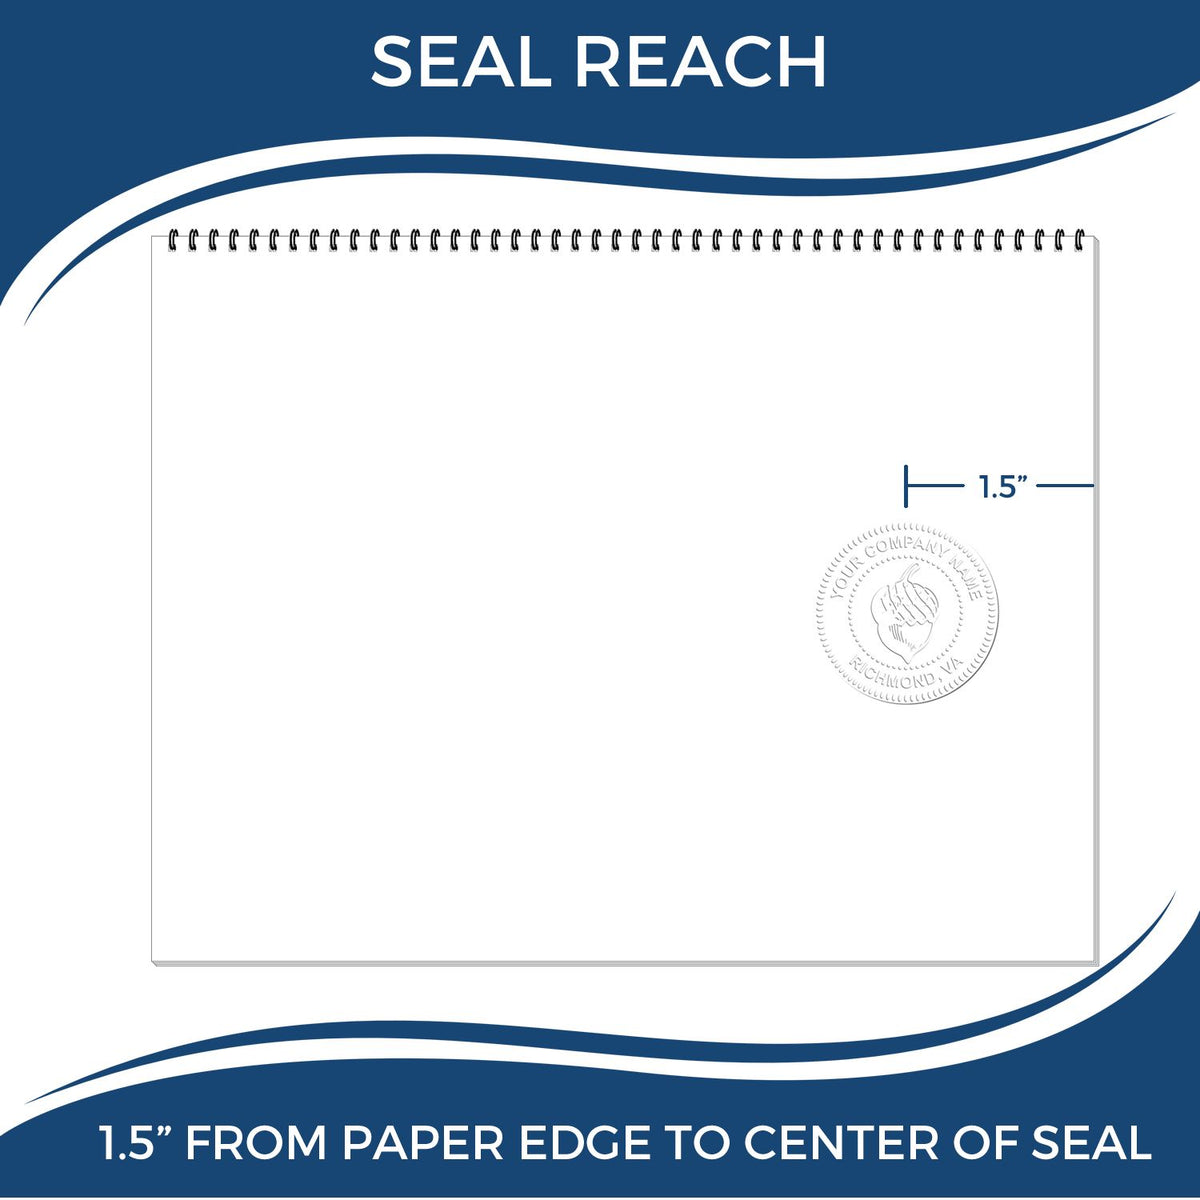 An infographic showing the seal reach which is represented by a ruler and a miniature seal image of the Soft Arizona Professional Geologist Seal